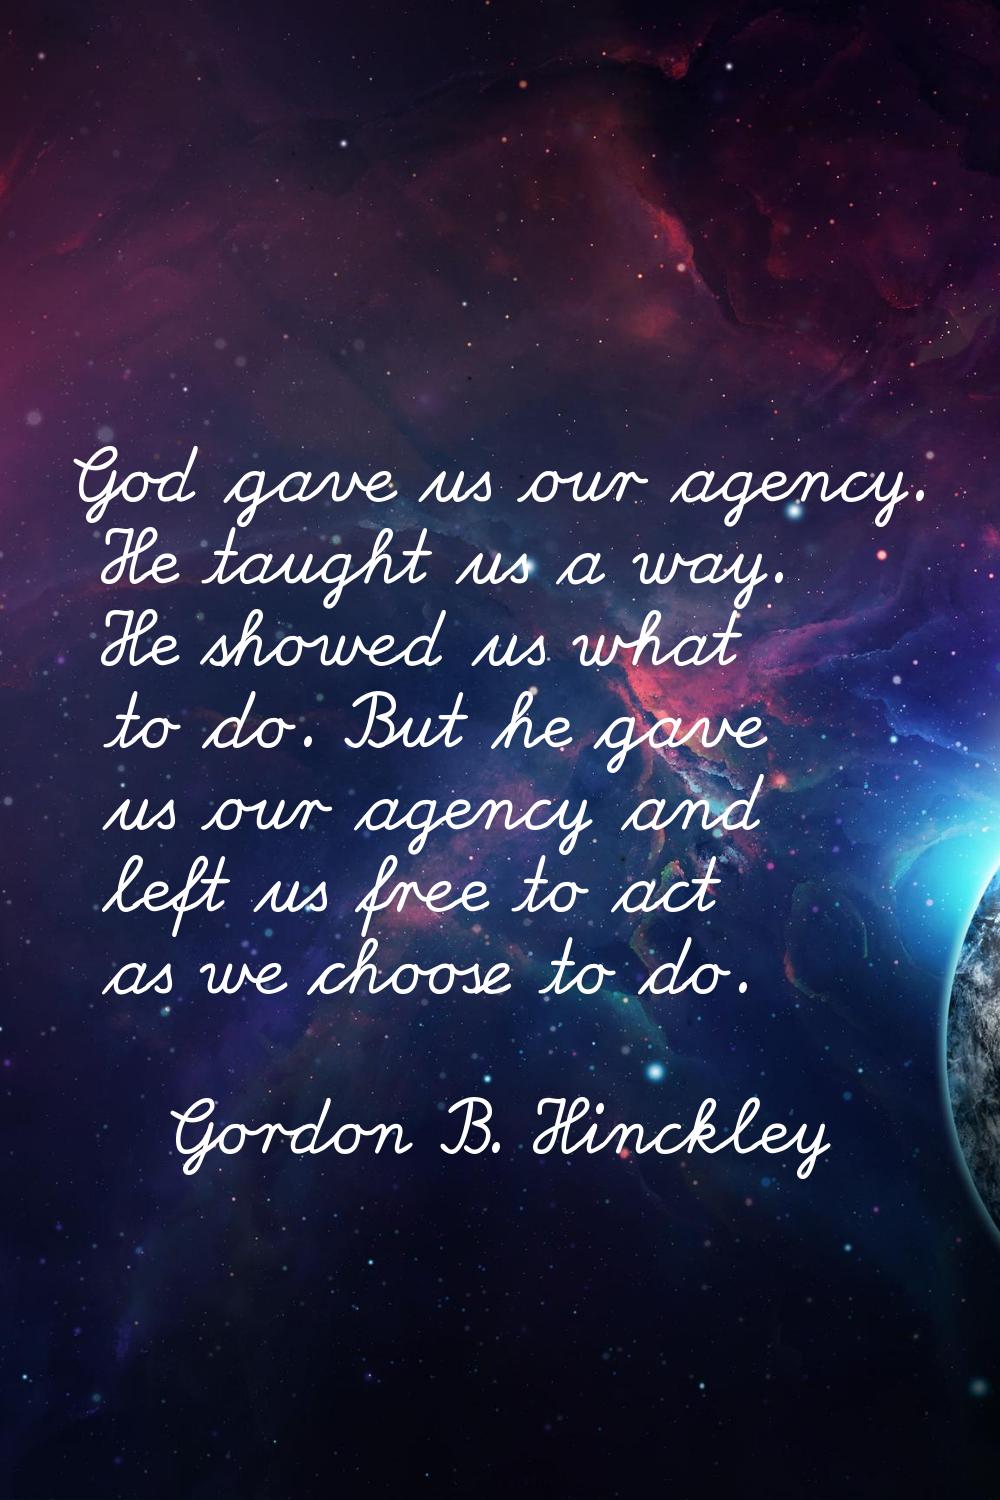 God gave us our agency. He taught us a way. He showed us what to do. But he gave us our agency and 